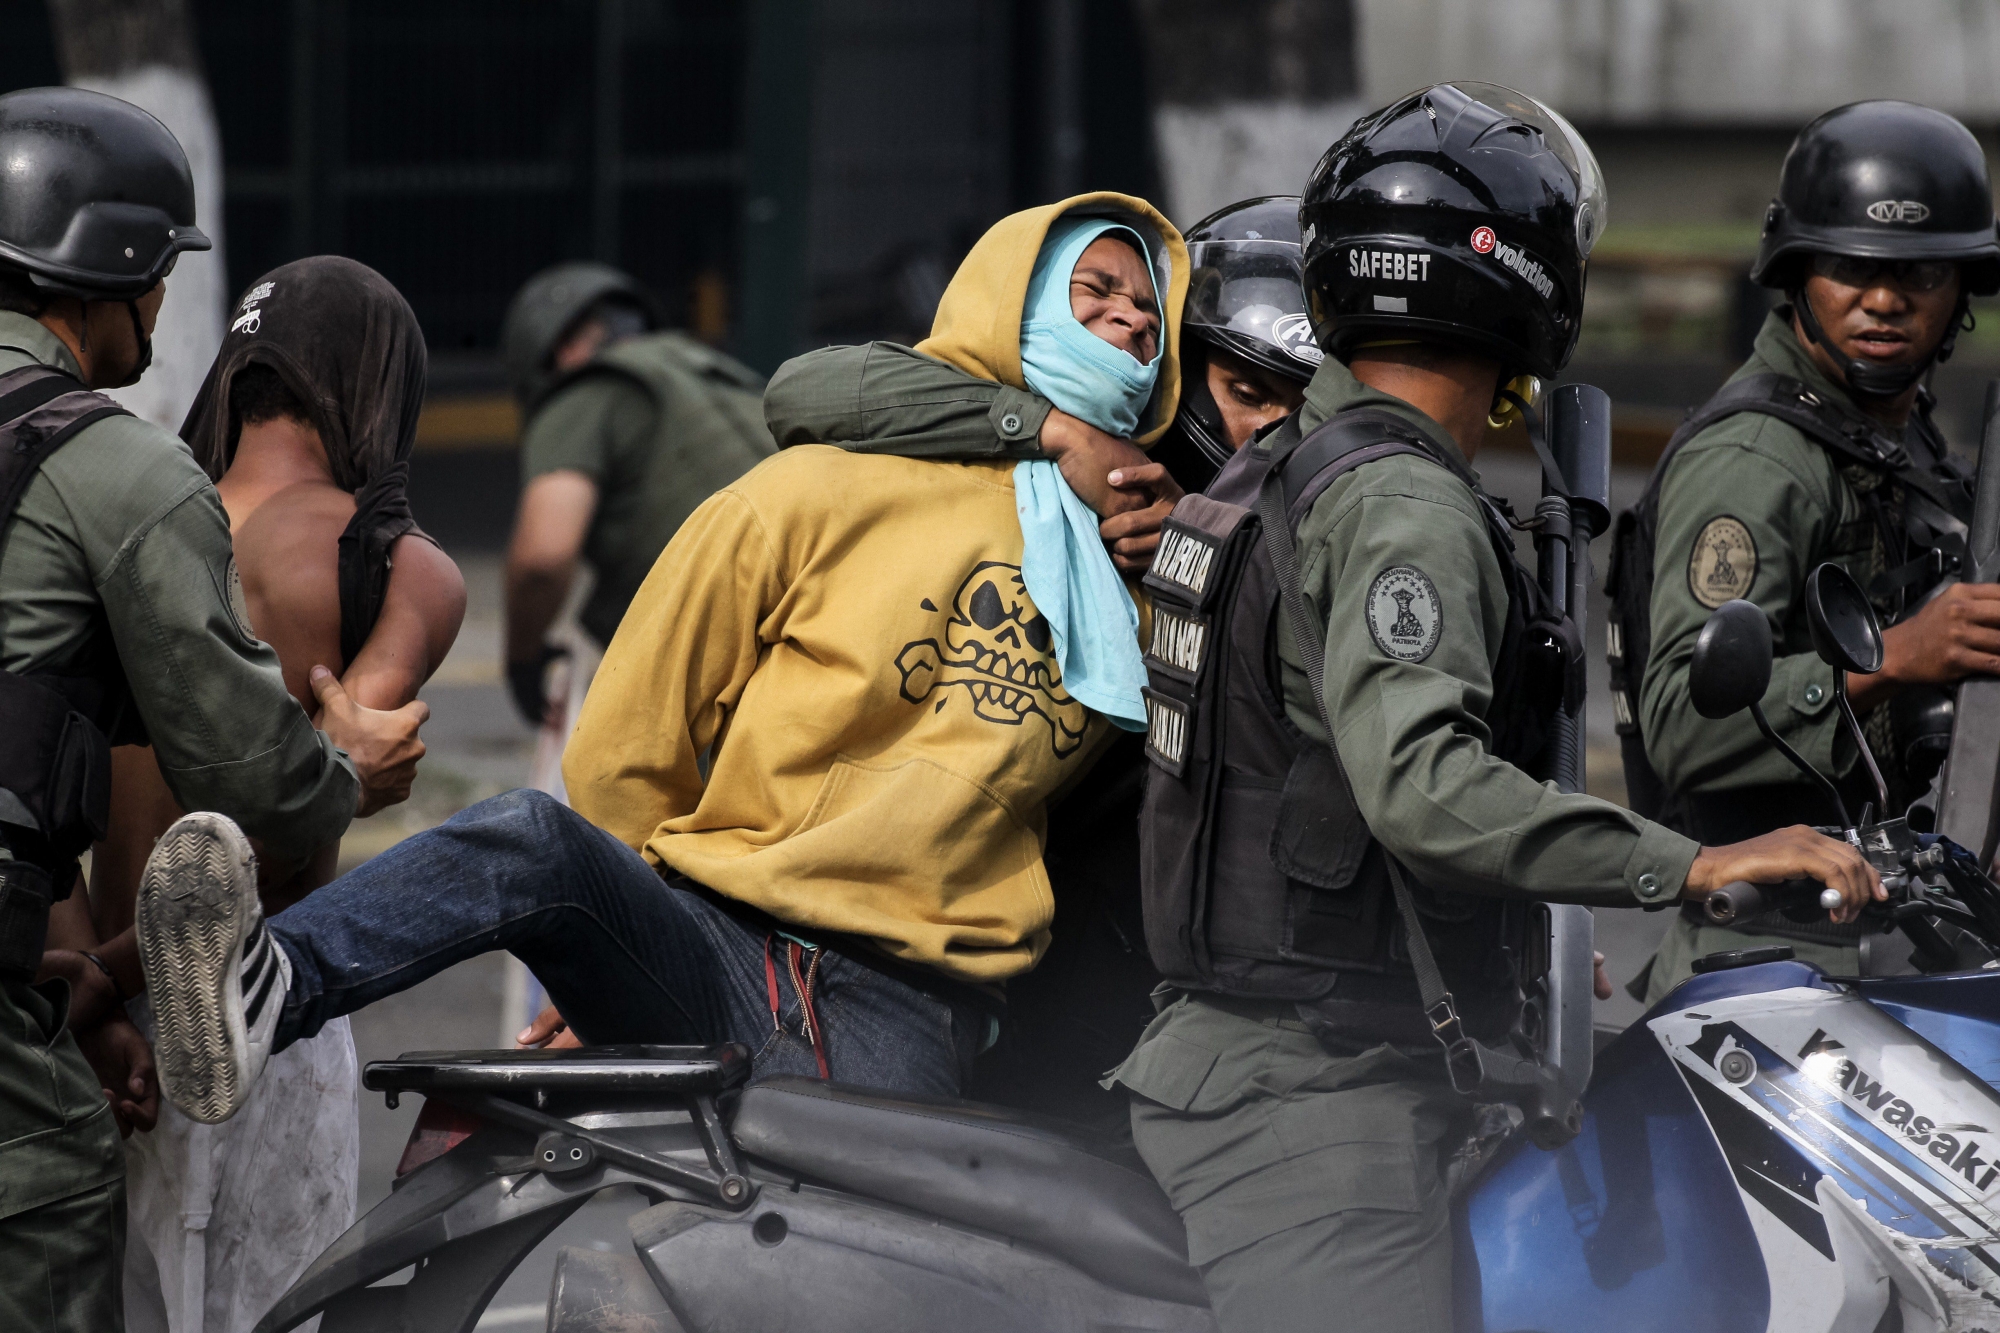 epa06113700 Members of the National Bolivarian Guard (GNB) arrest a protester during riots in Caracas, Venezuela, 27 July 2017. The Venezuelan opposition initiated a 48-hour general strike called for 26 and 27 July to demand that President Nicolas Maduro cease the 30 July election of a Constituent Assembly to draft a new constitution.  EPA/MIGUEL GUTIERREZ VENEZUELA CRISIS